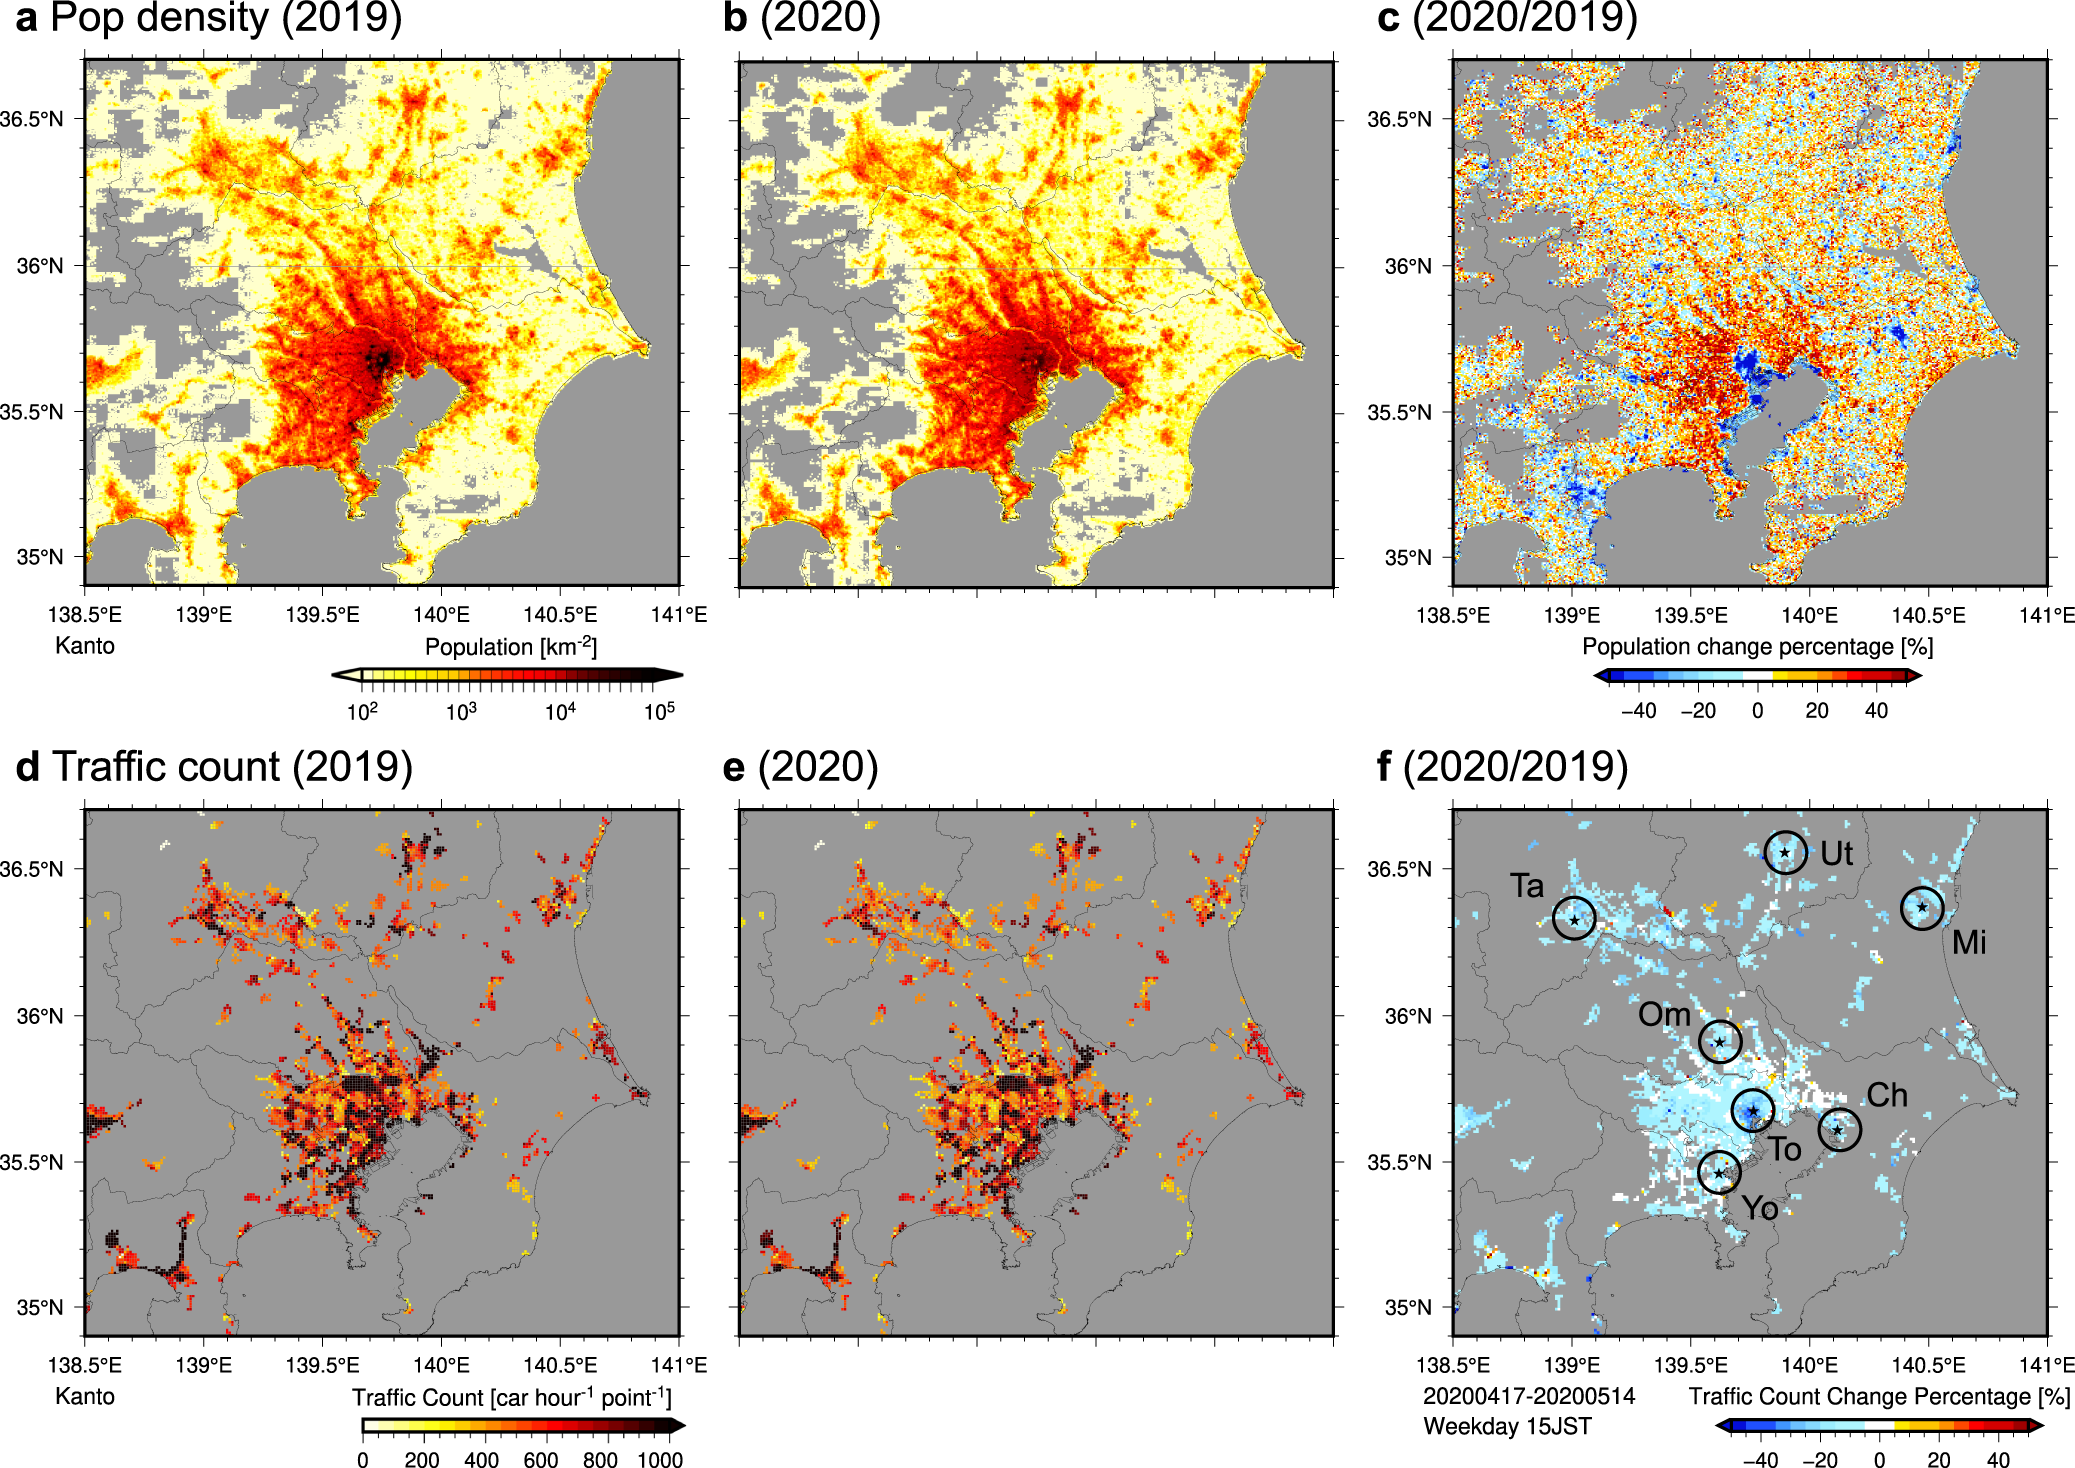 Urban climate changes during the COVID-19 pandemic: integration of